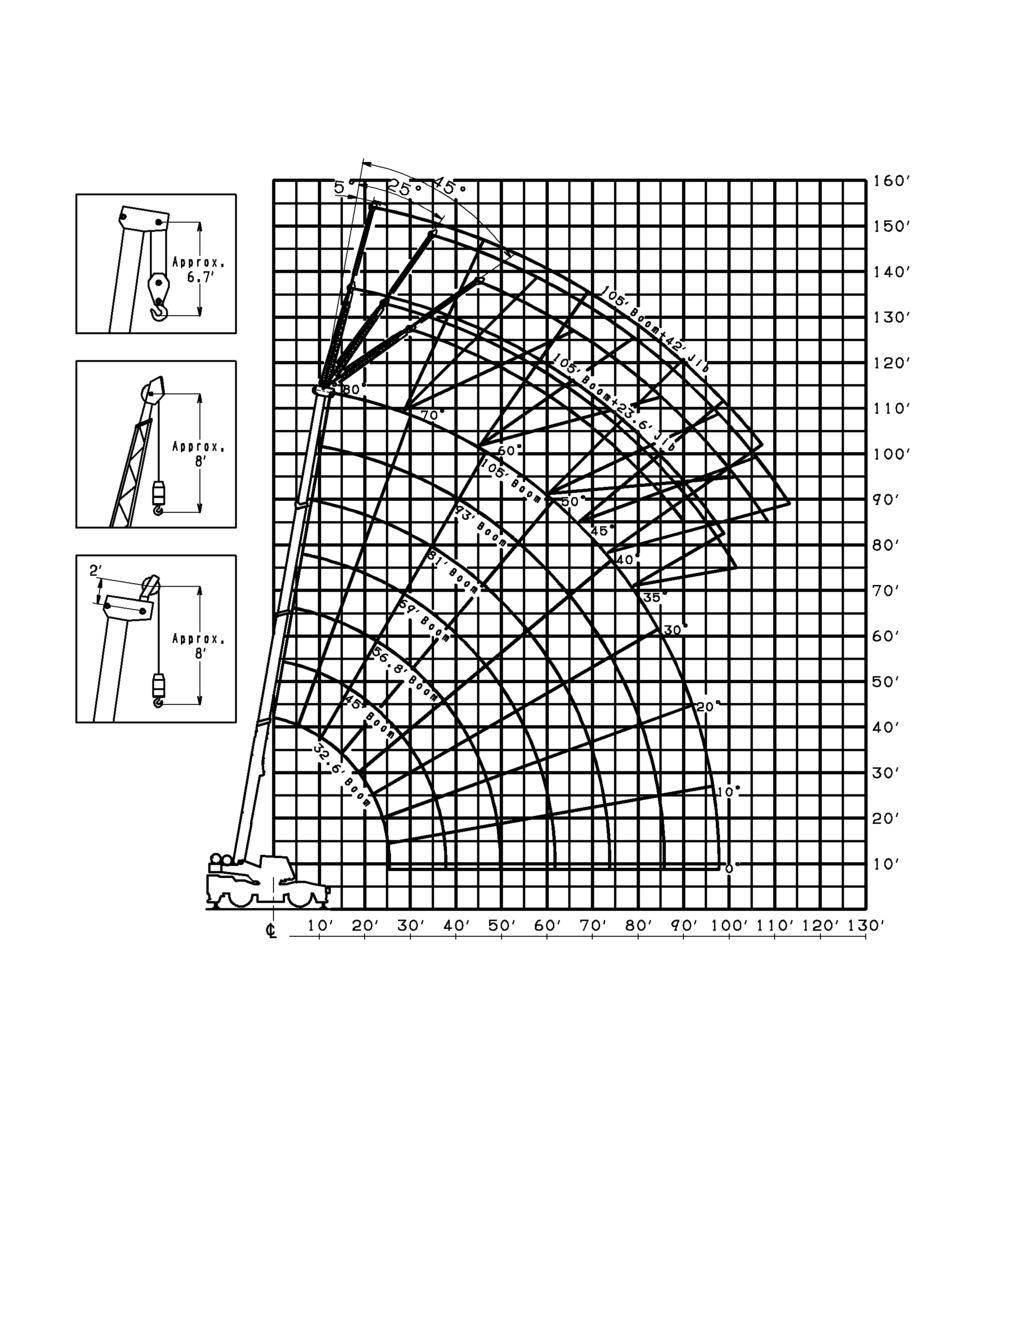 TR-350XL-3 WORKING RANGE CHART Lifting Height in Feet Axis of Rotation Load radius from Axis of Rotation in Feet NOTE: Boom and jib geometry shown are for unloaded